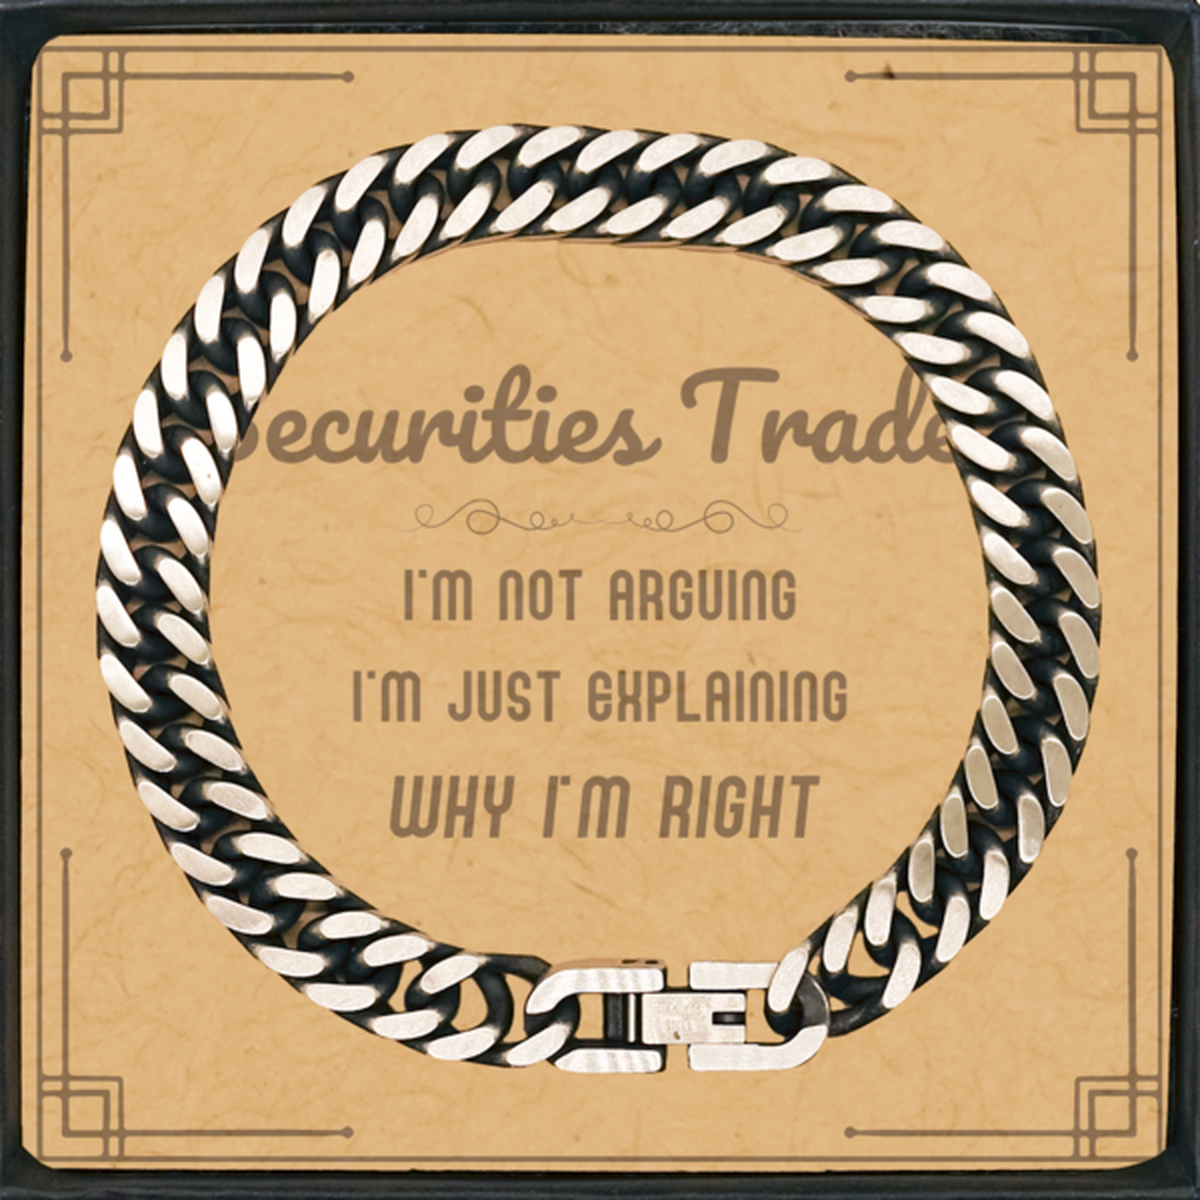 Securities Trader I'm not Arguing. I'm Just Explaining Why I'm RIGHT Cuban Link Chain Bracelet, Funny Saying Quote Securities Trader Gifts For Securities Trader Message Card Graduation Birthday Christmas Gifts for Men Women Coworker